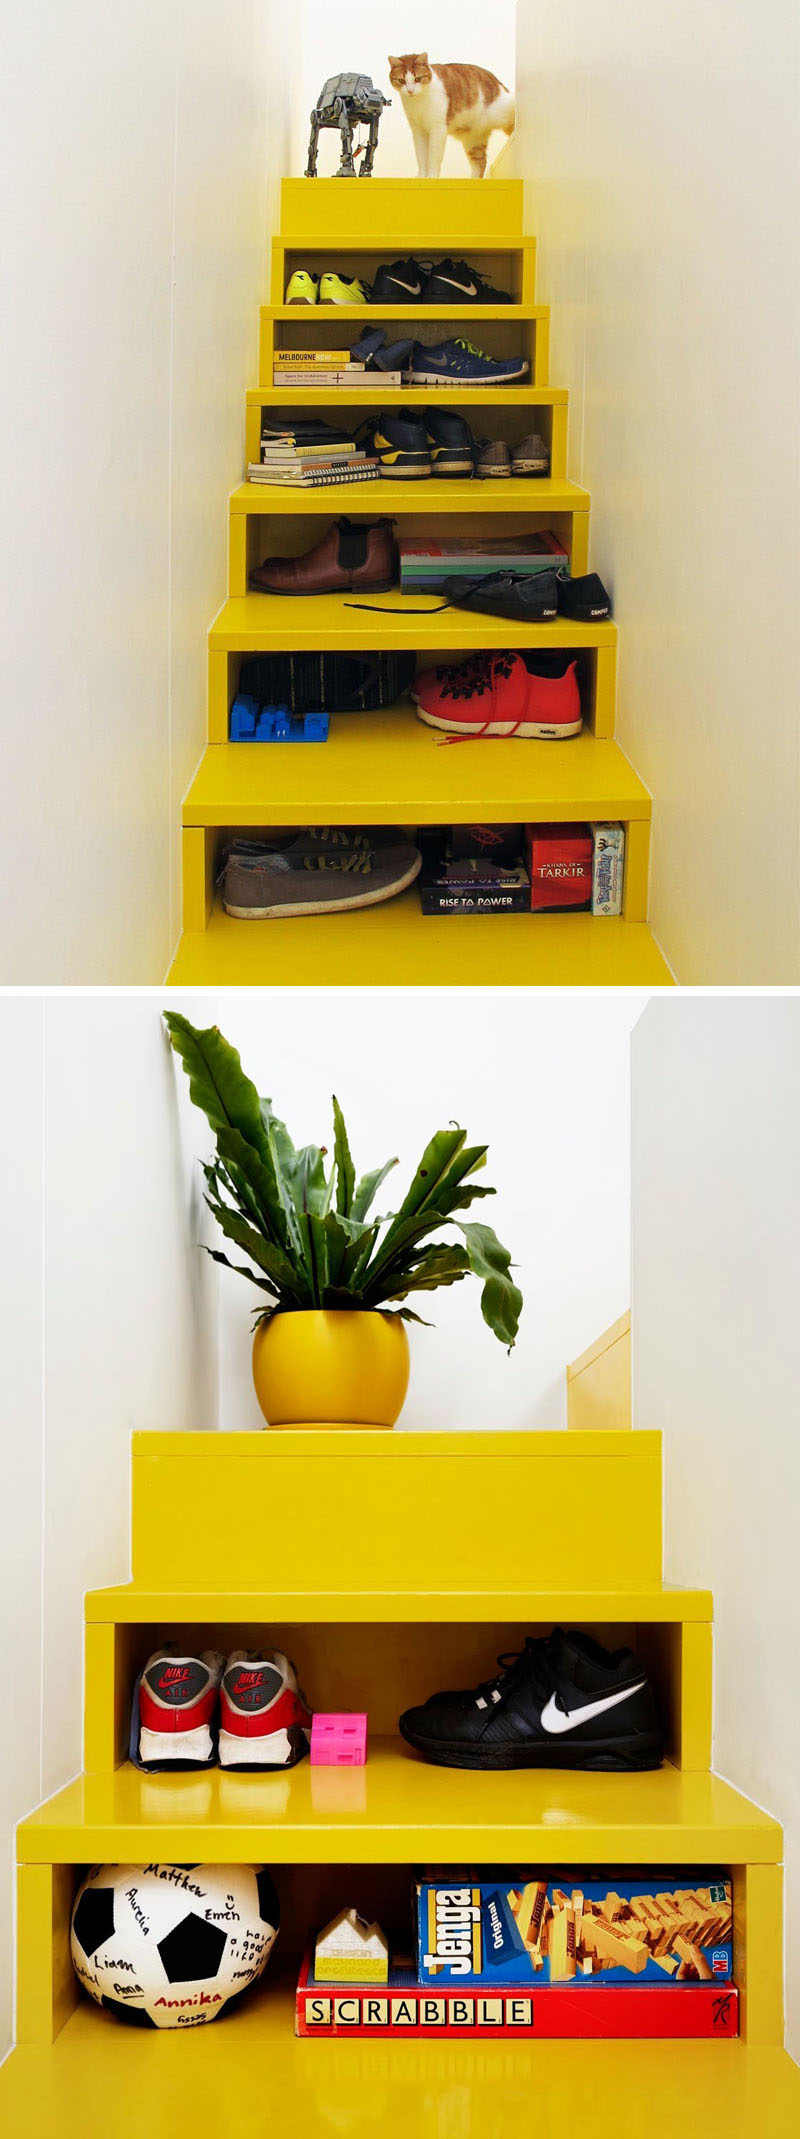 These bright yellow stairs with storage have been designed with open fronts instead of drawers, so you can easily see what is being stored.